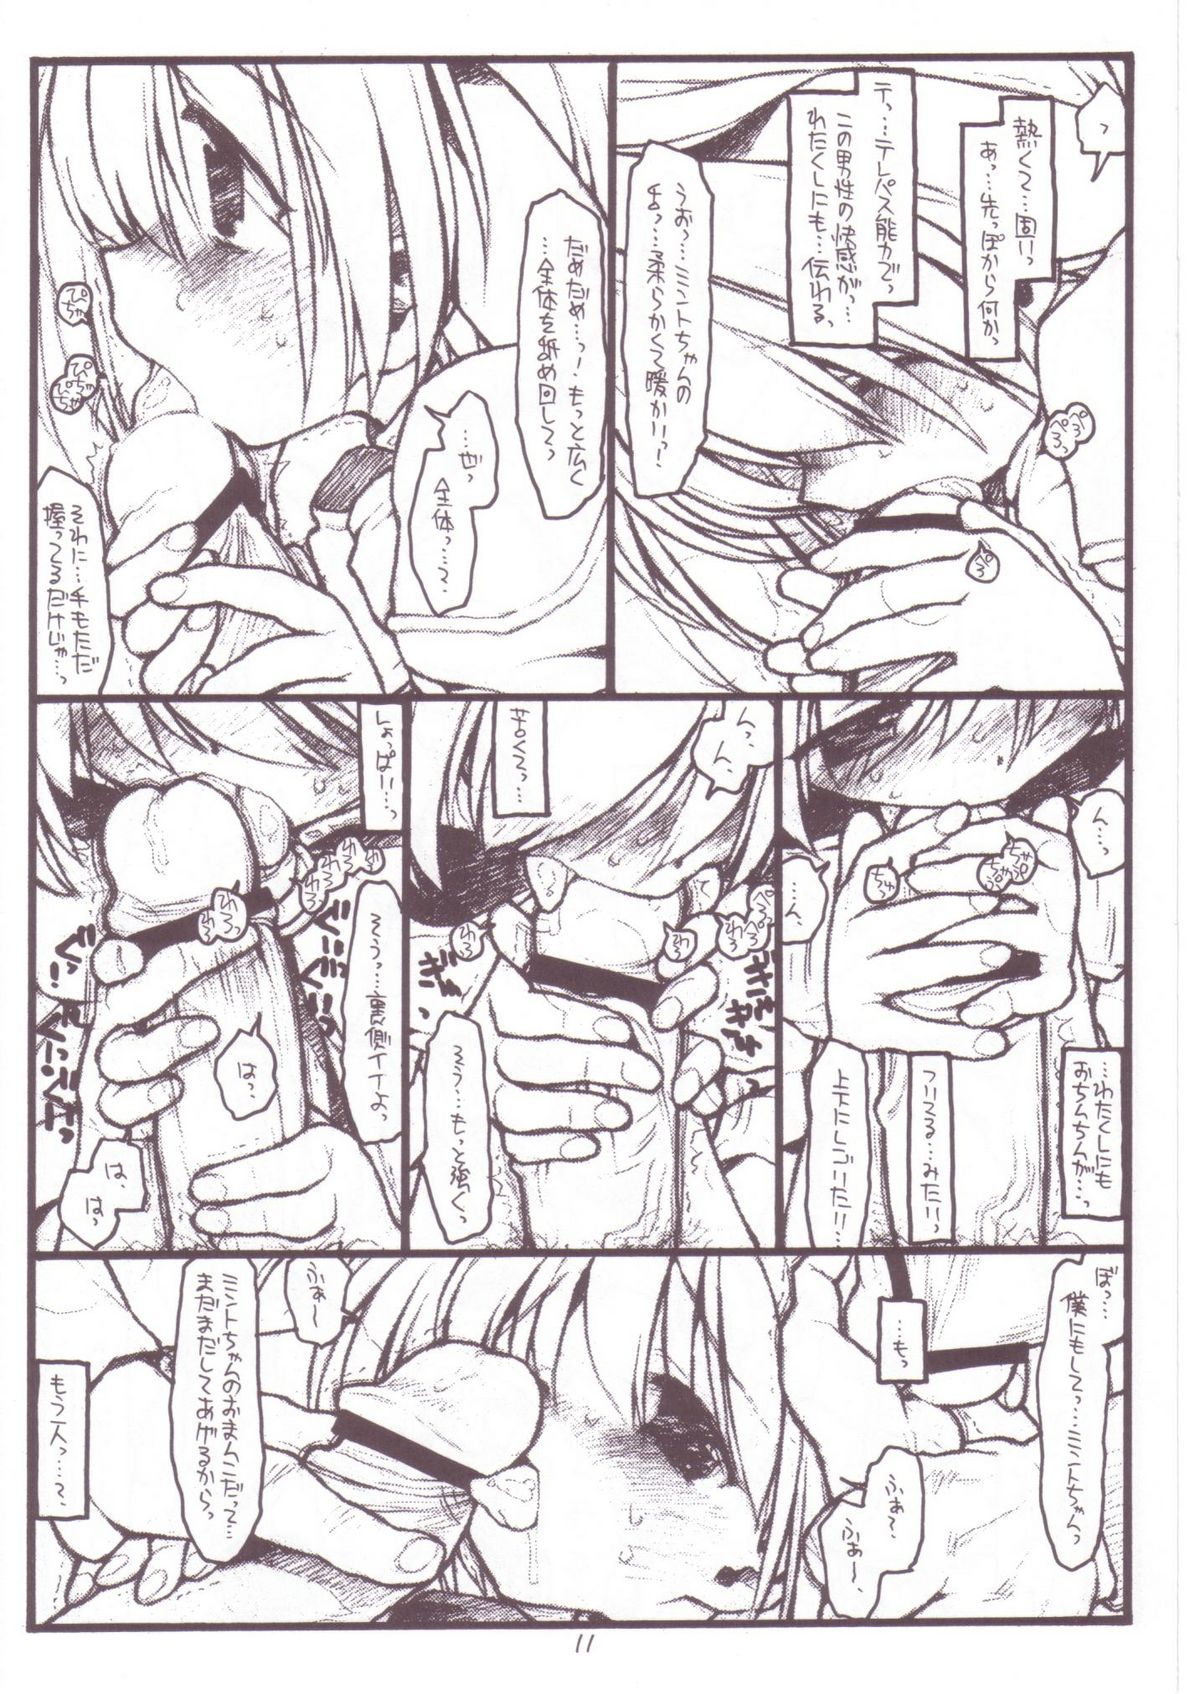 [bolze] Mint Erotic Extended Version page 10 full